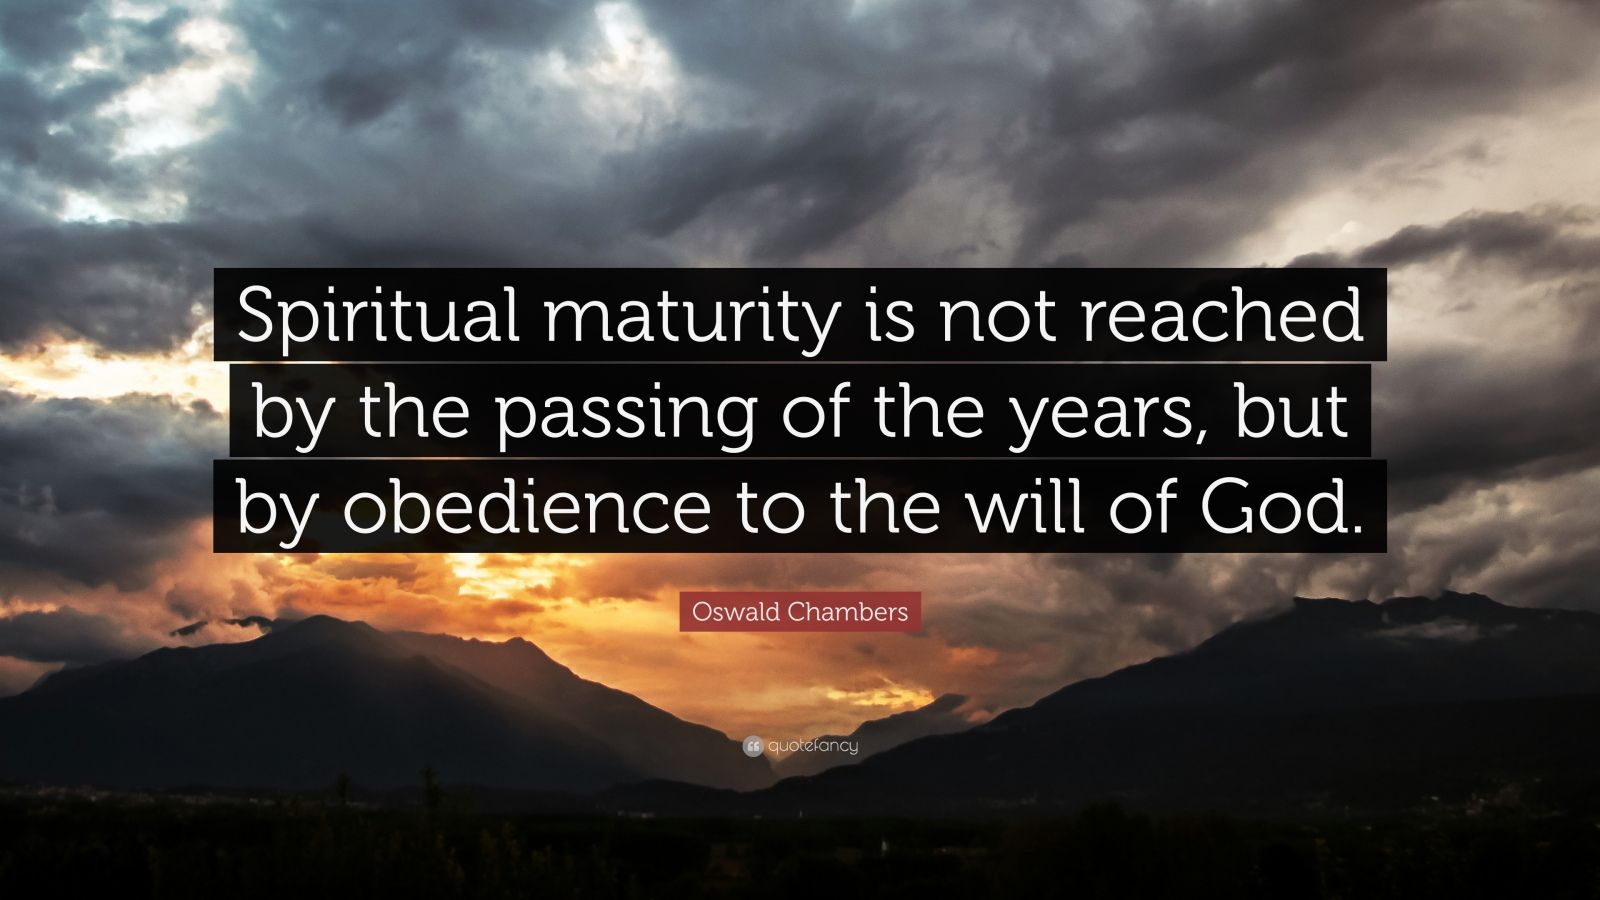 Oswald Chambers Quote: “Spiritual maturity is not reached by the ...